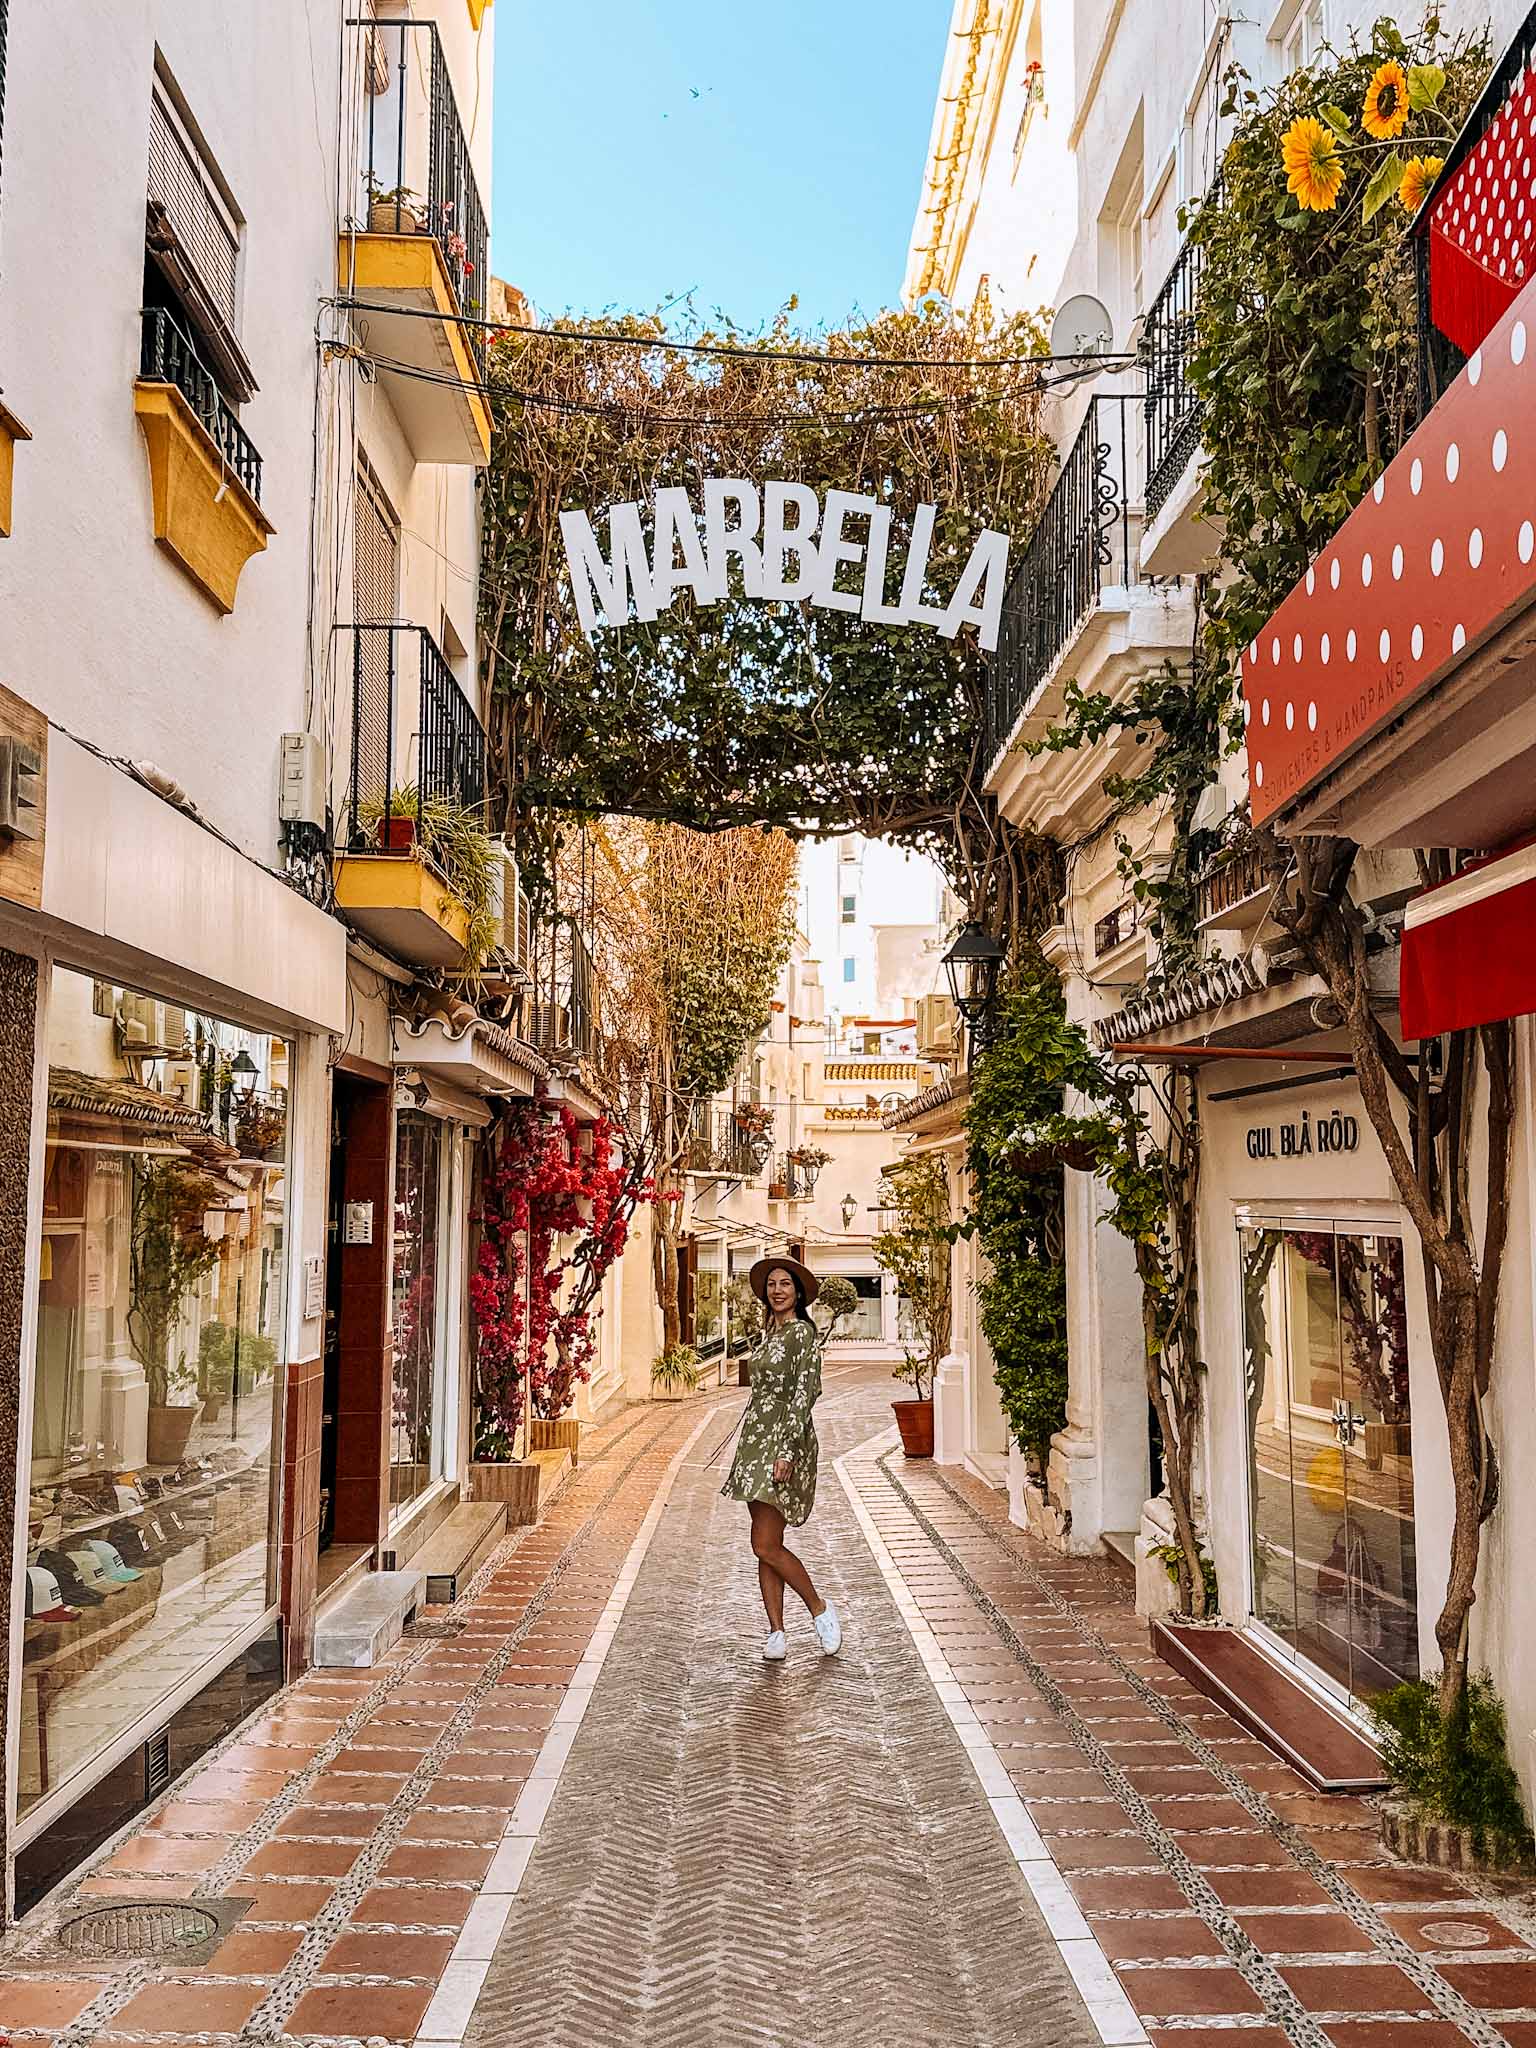 Most beautiful whitewashed villages and unique towns in Andalusia, Spain - Marbella Old Town